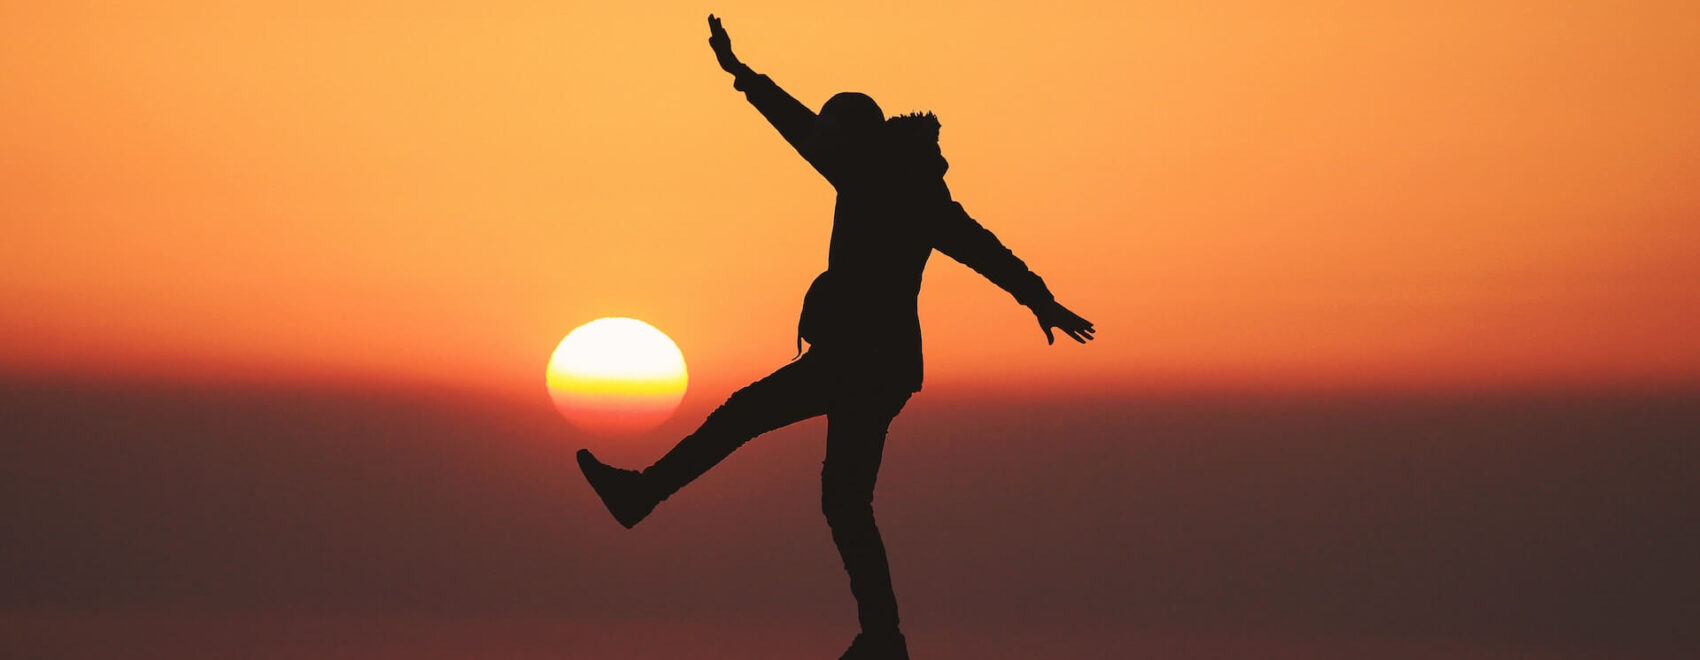 A silhouette of a person balancing on a rock in front of the setting sun. Learn how functional medicine in Orland Park, IL can offer support and balance in the new year. Contact a functional medicine doctor in the Chicago area or search for a diabetes functional medicine in Orland Park, IL.